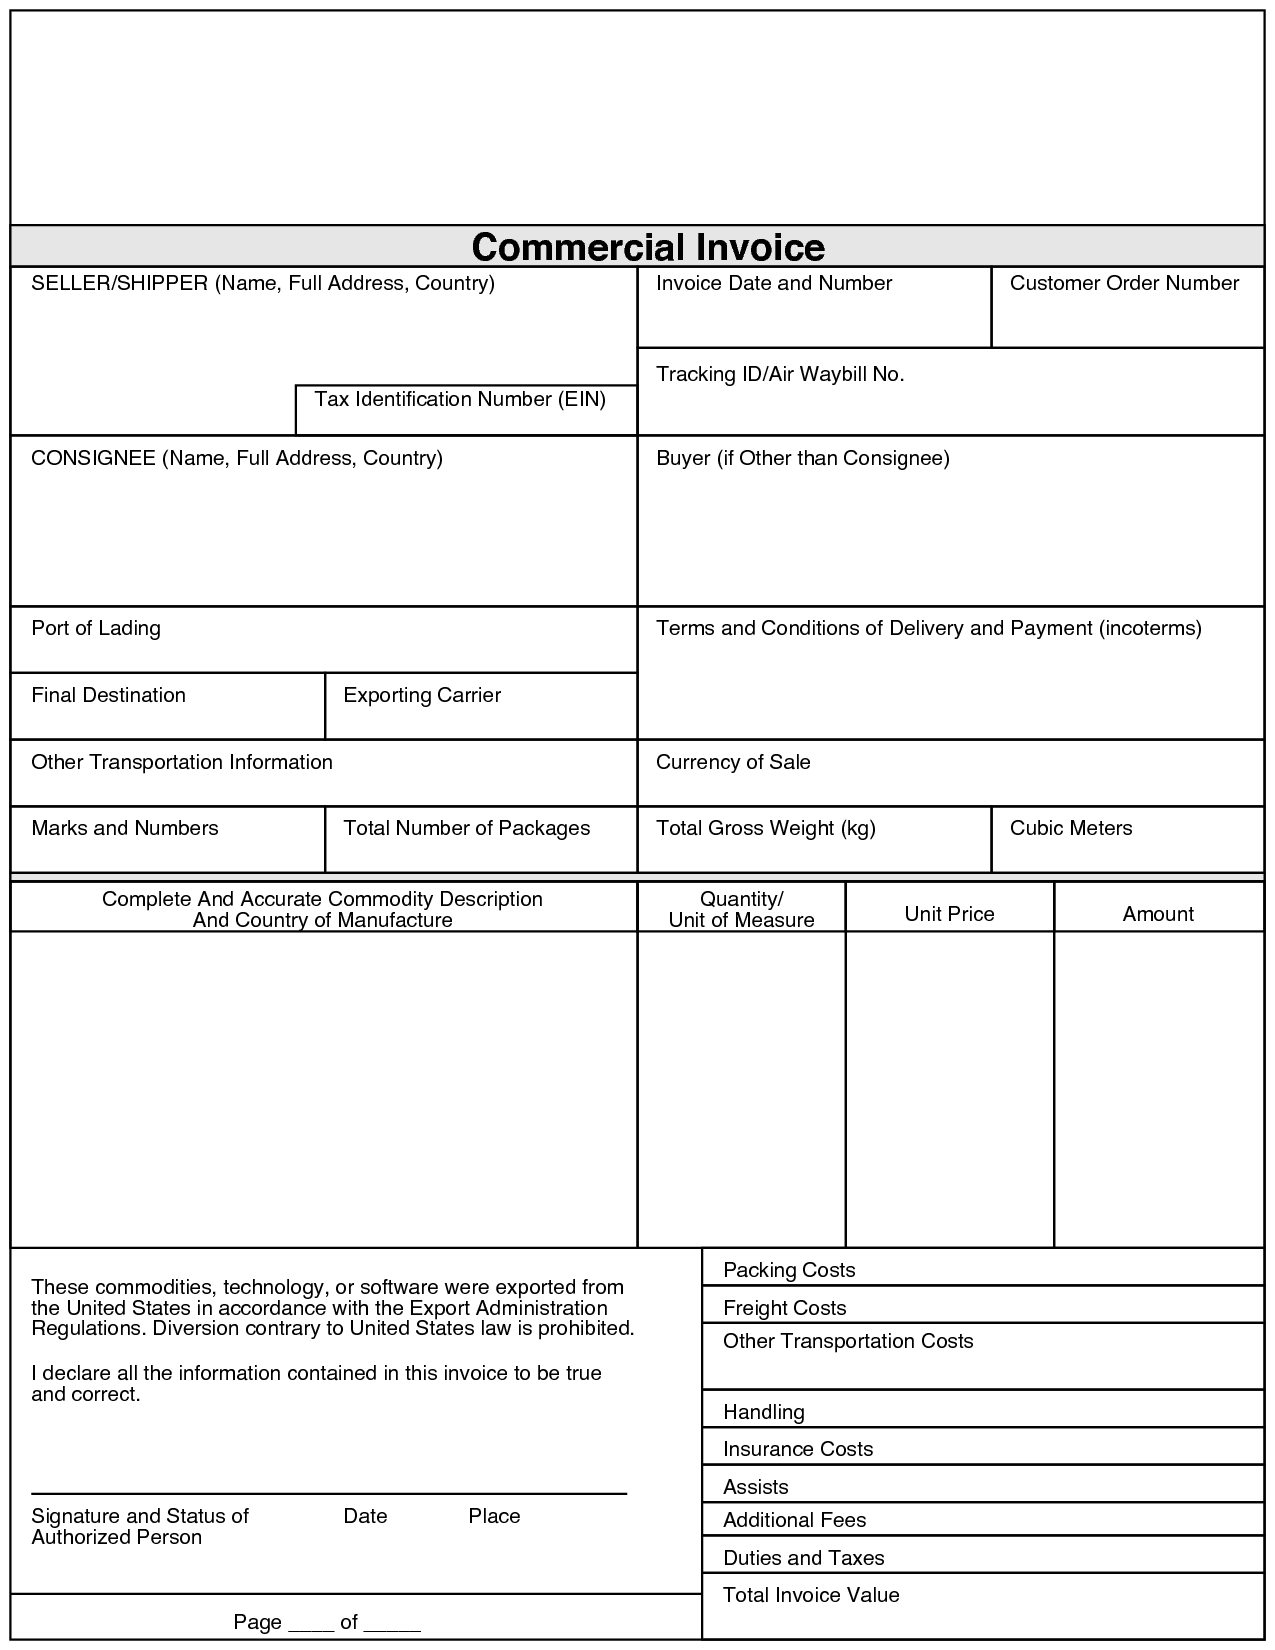 fedex ground commercial invoice fedex commercial invoice pdf best business template 1275 X 1650